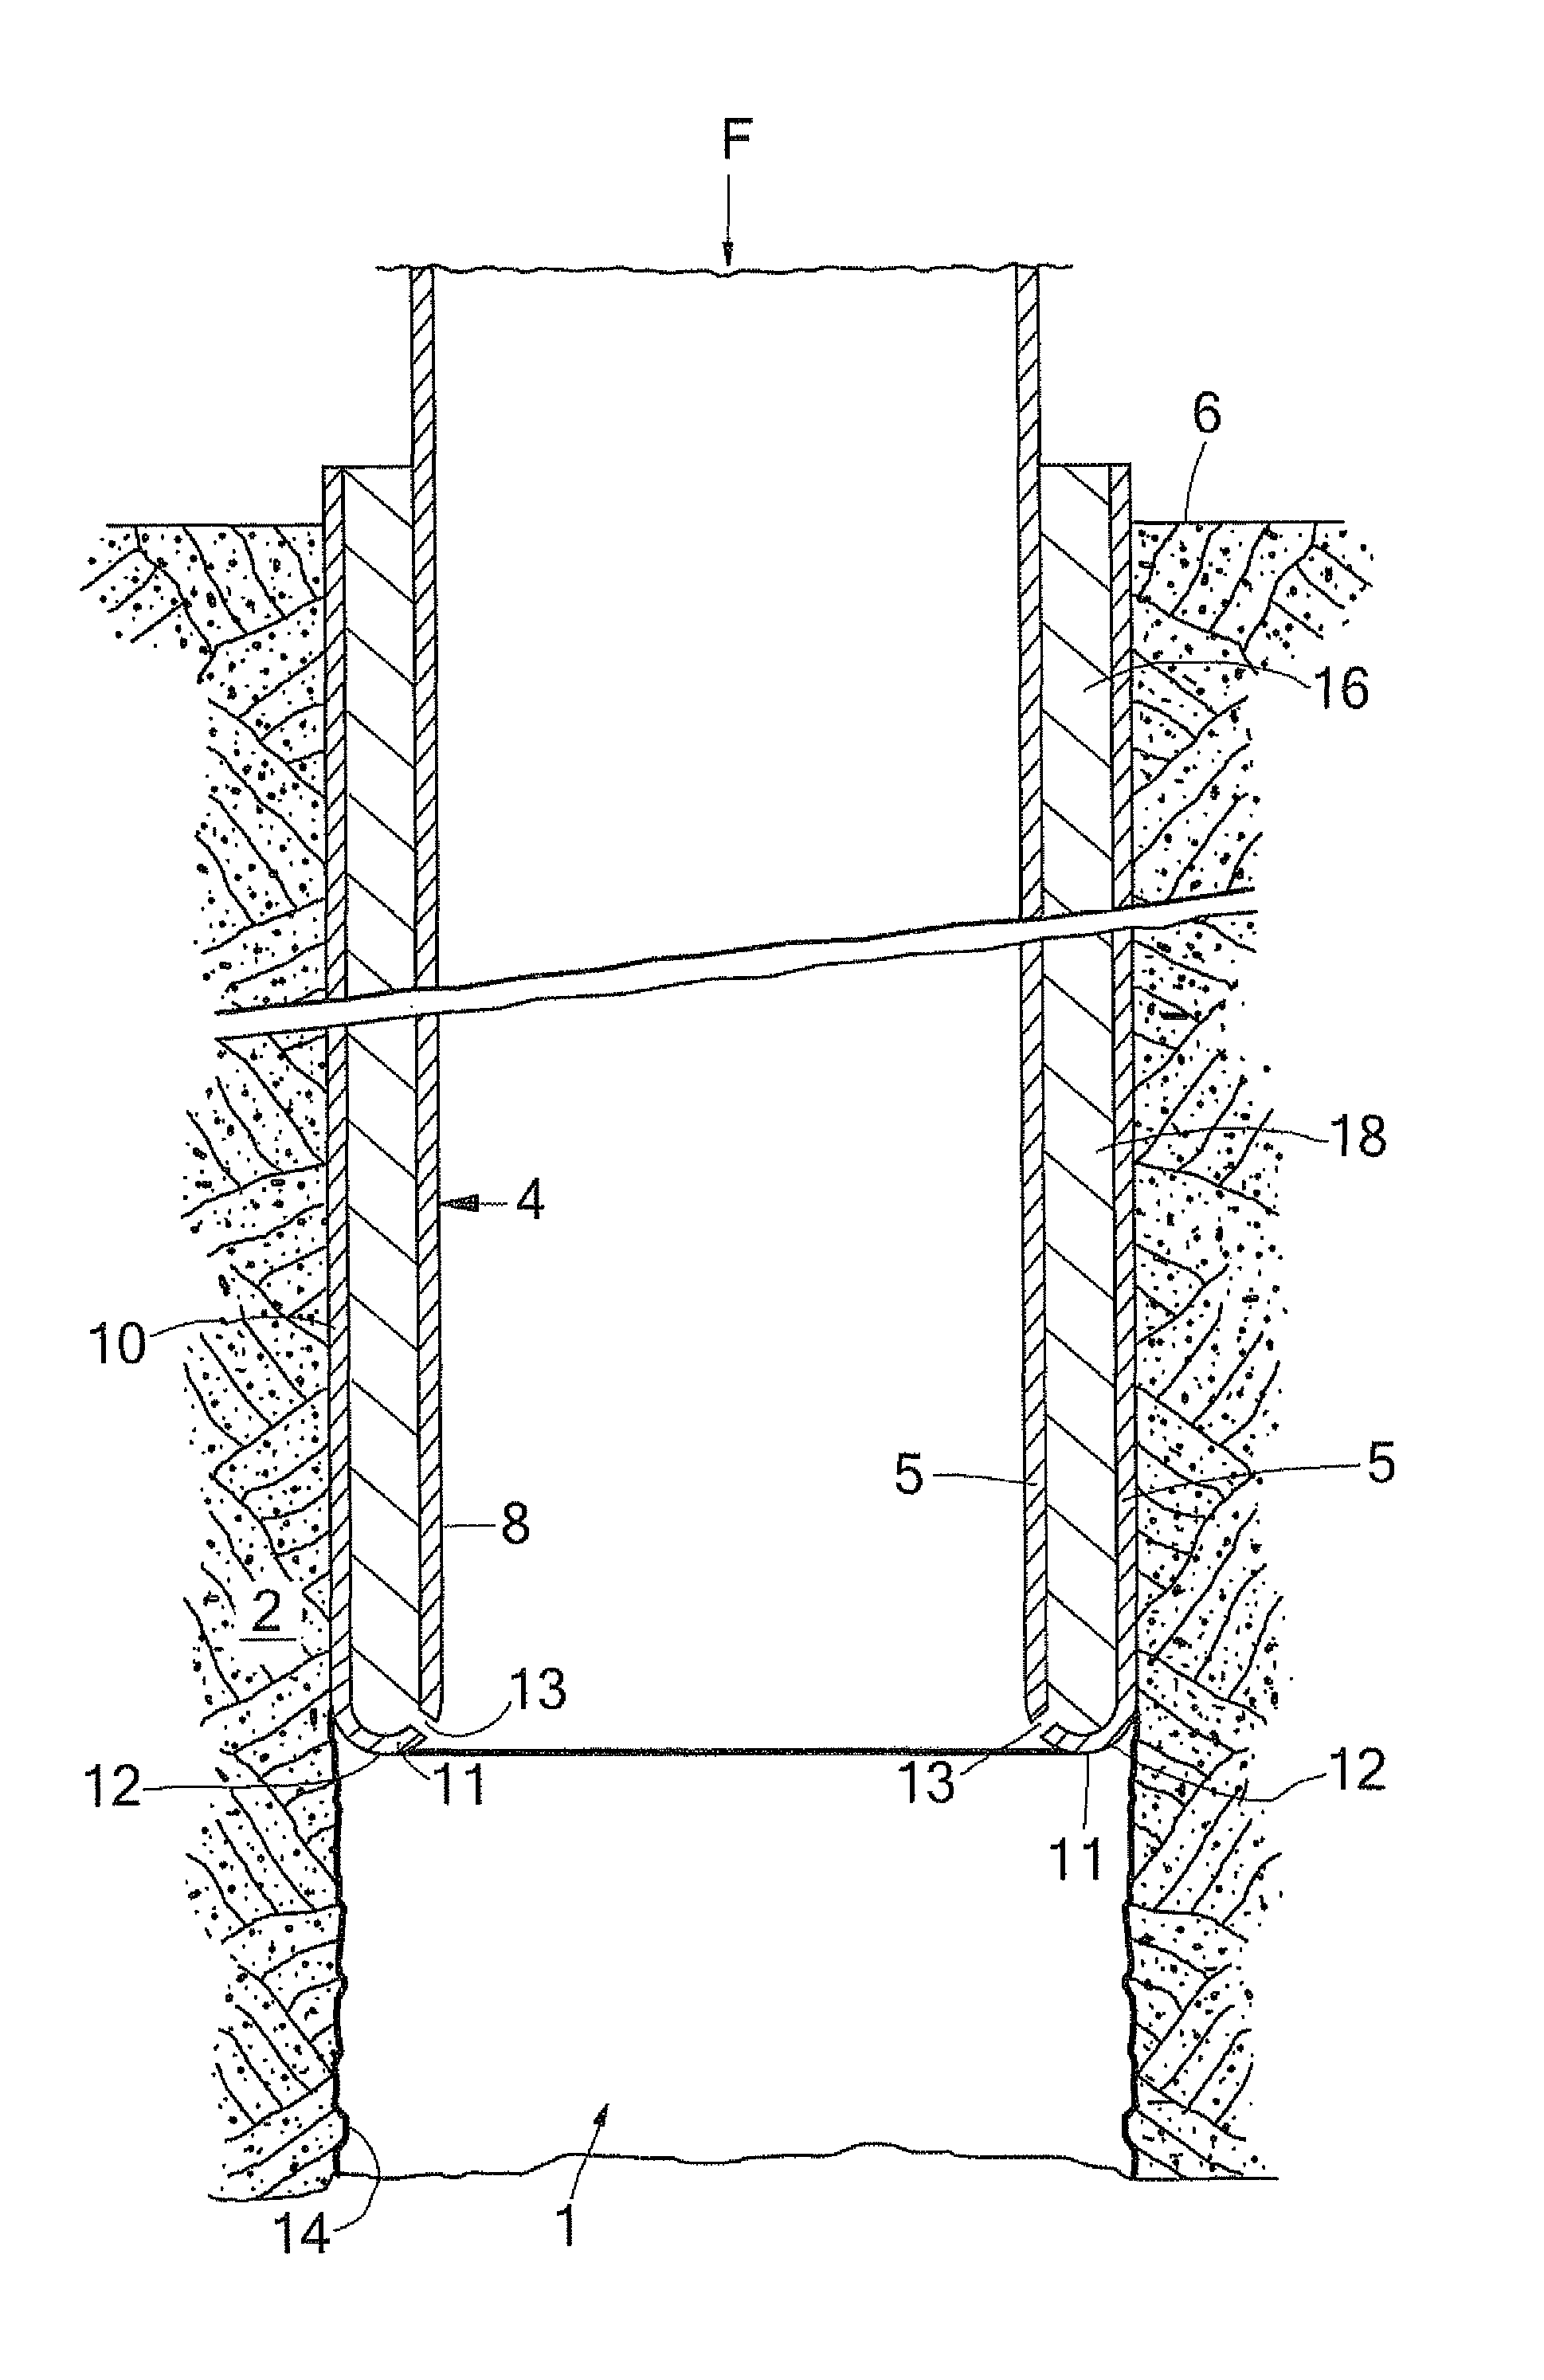 Method of expanding a tubular element in a wellbore